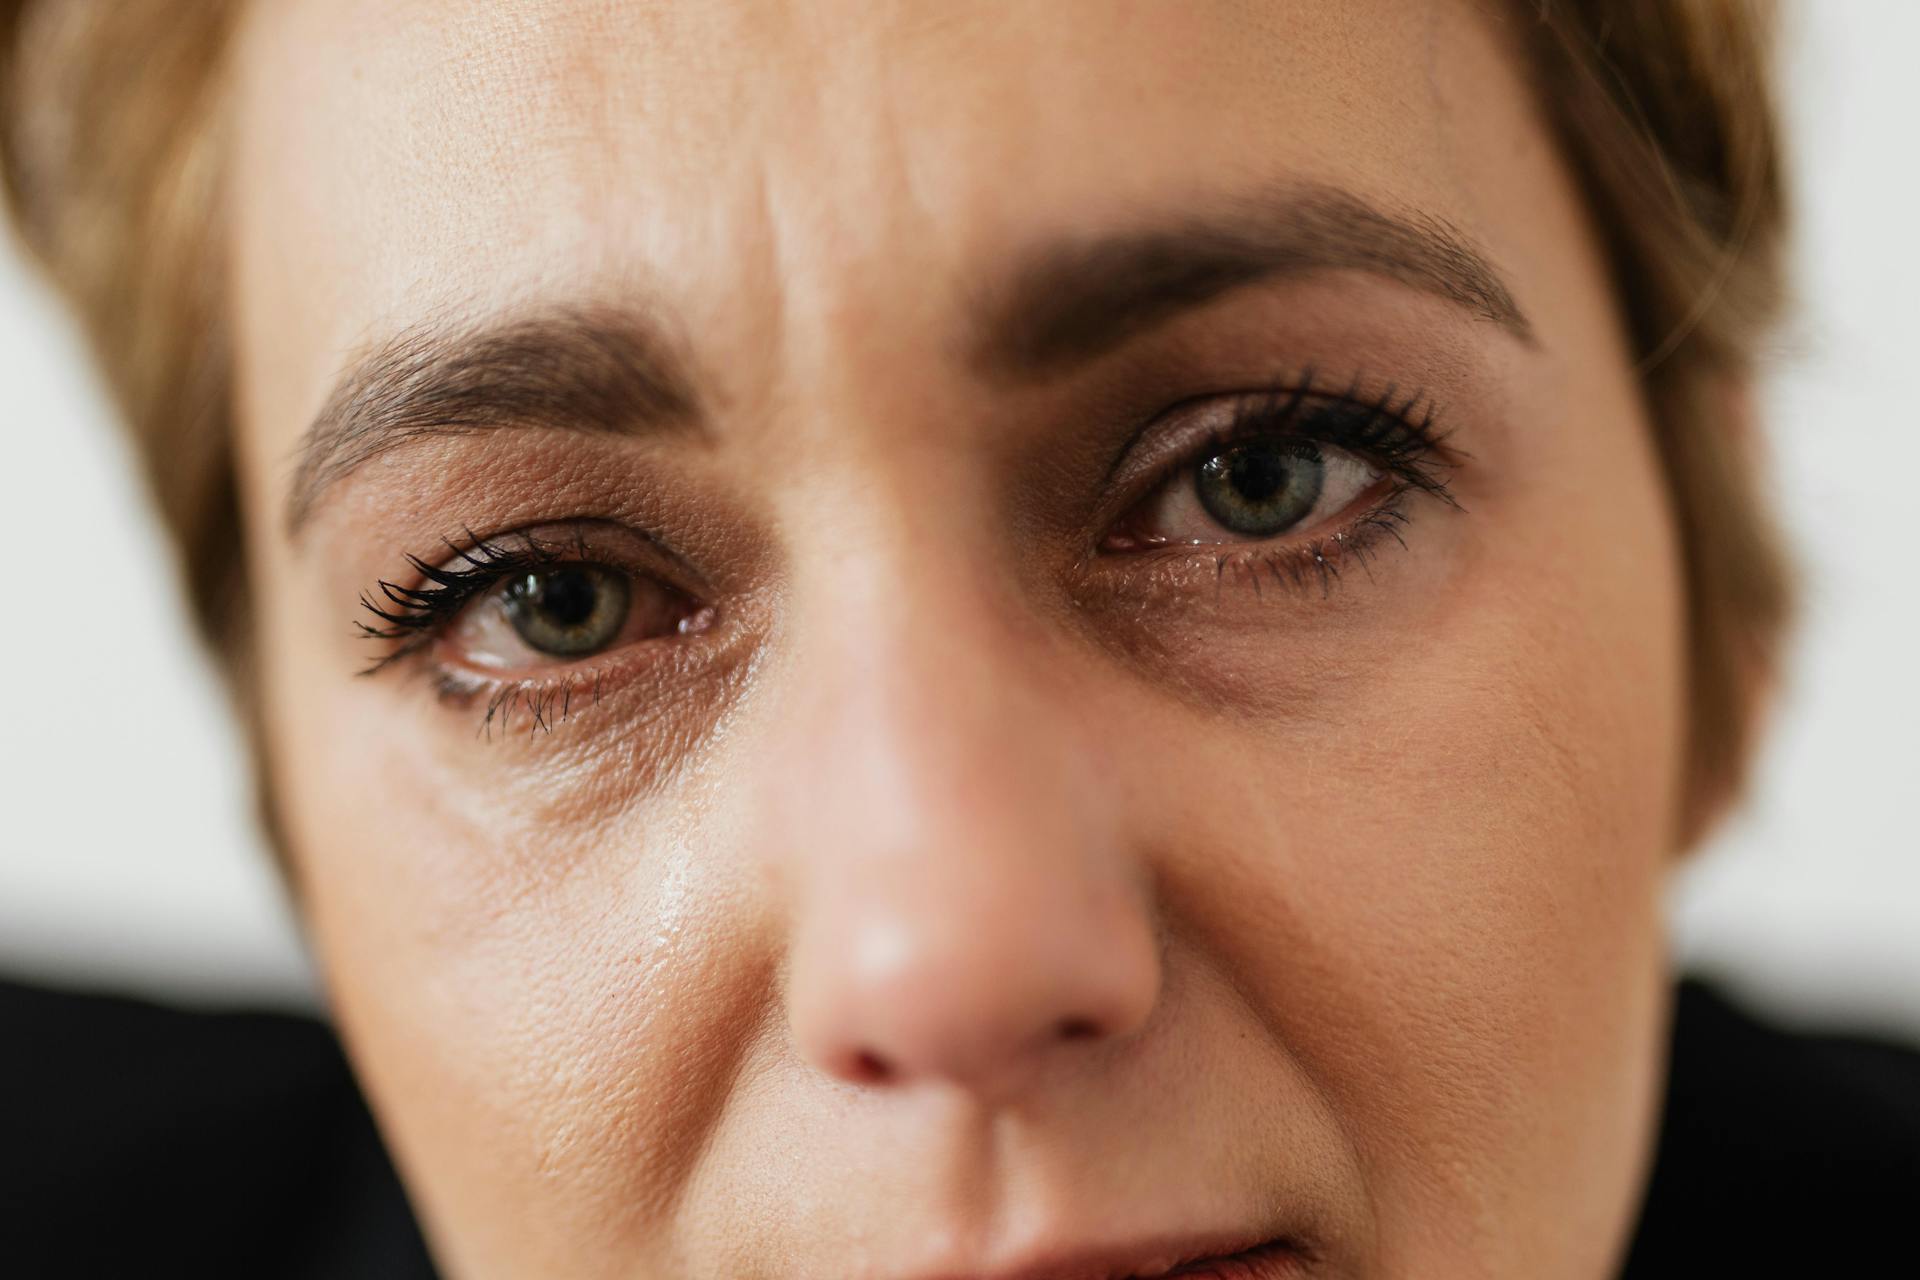 A disheartened woman with tears threatening to spill | Source: Pexels